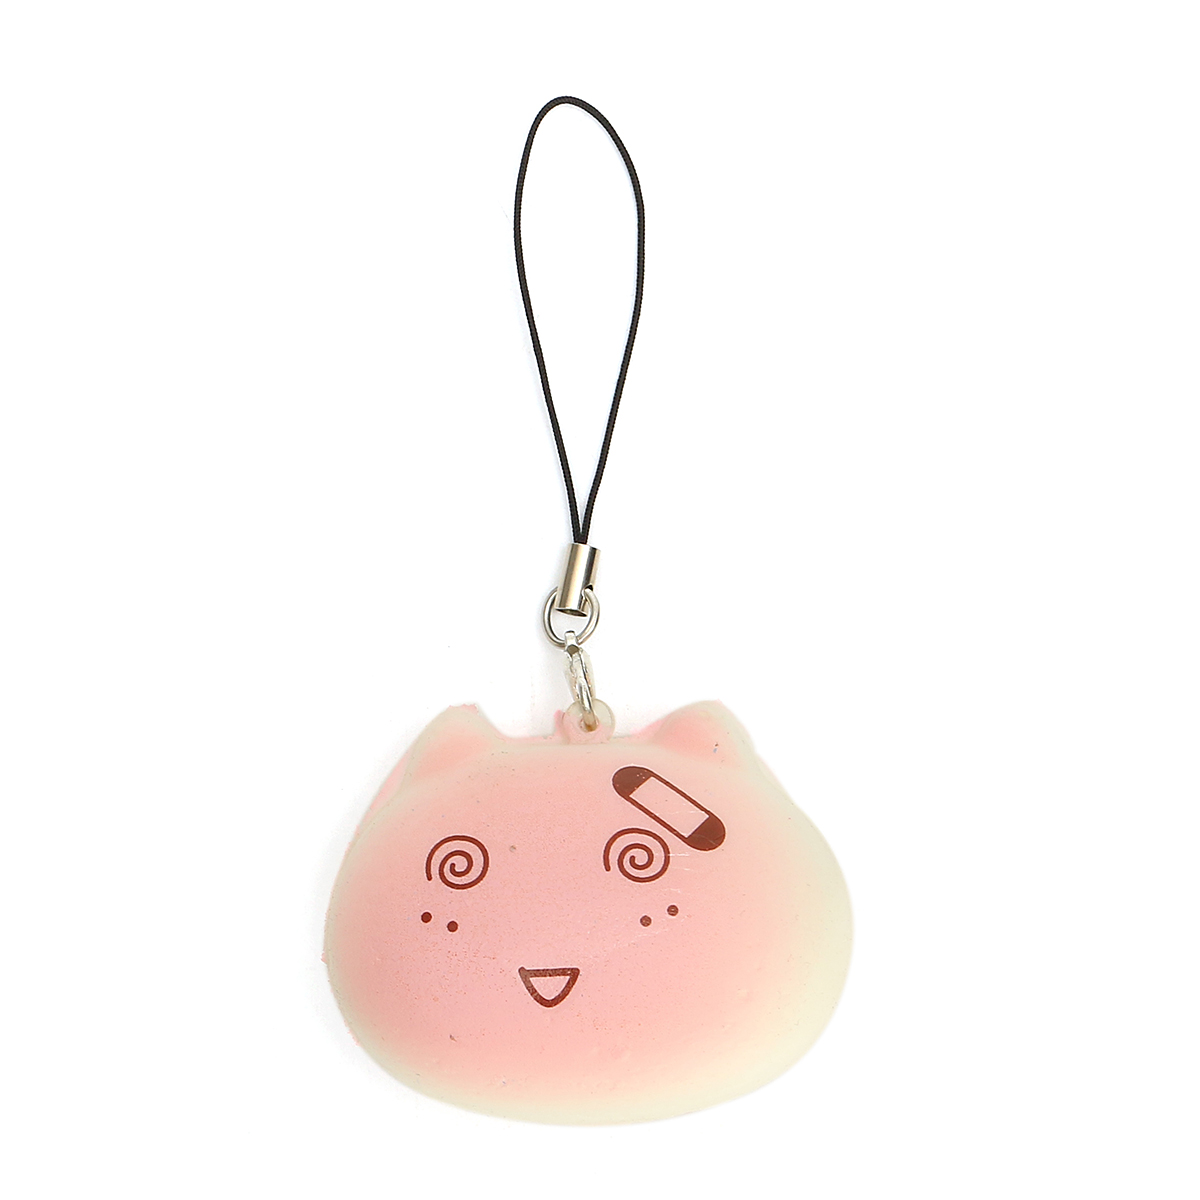 1PCS-Kawaii-Face-Simulate-Colorful-Cartoon-Totoro-Squishy-Toy-Stress-Reliever-Phone-Chain-1137334-5